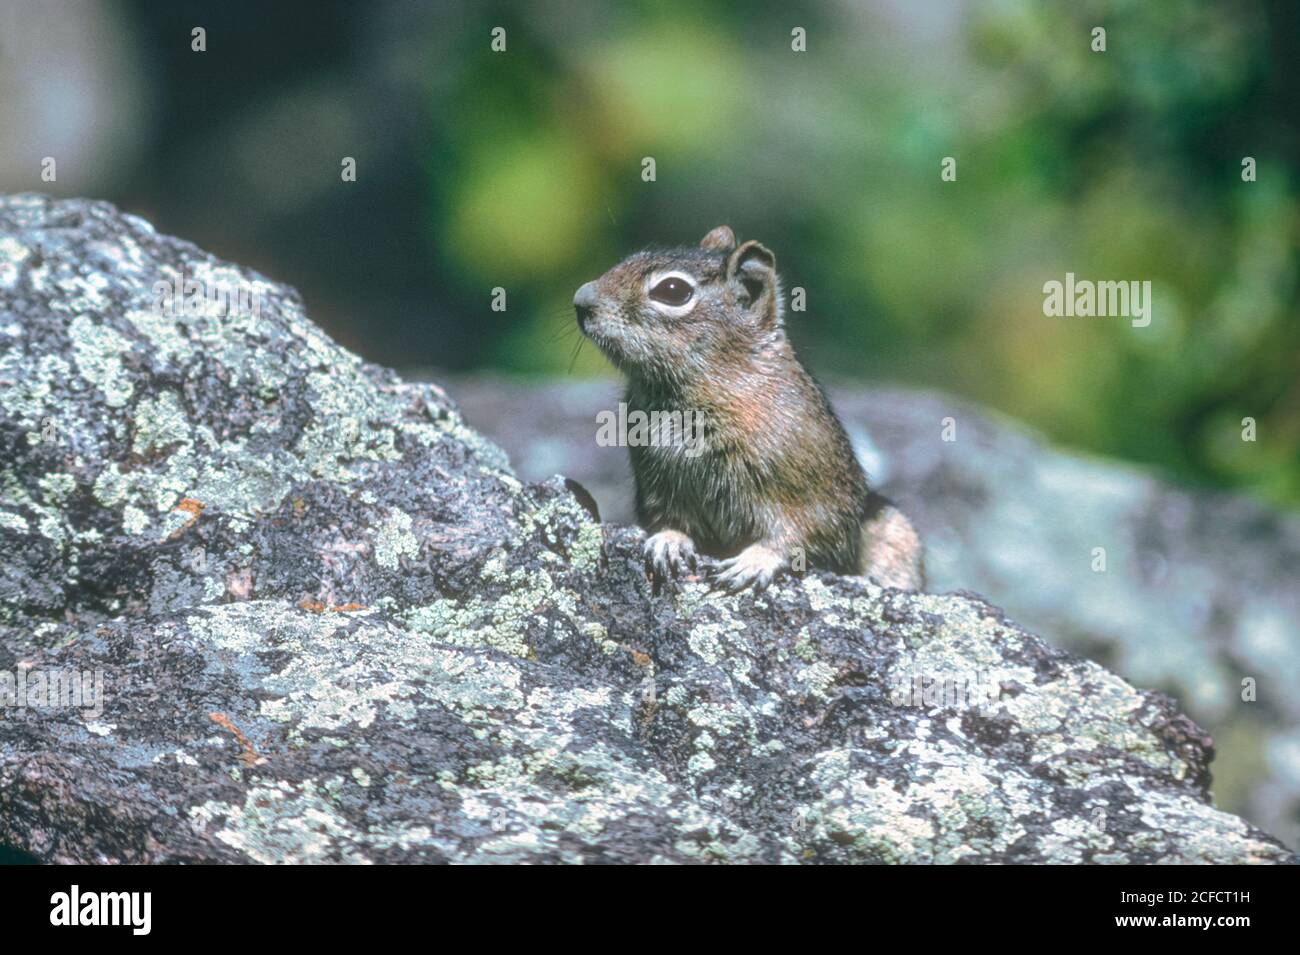 Golden-mantled Ground Squirrel (Callospermophilus lateralis), Rocky Mountain National Park Colorado. From original Kodachrome 64 transparency. Stock Photo